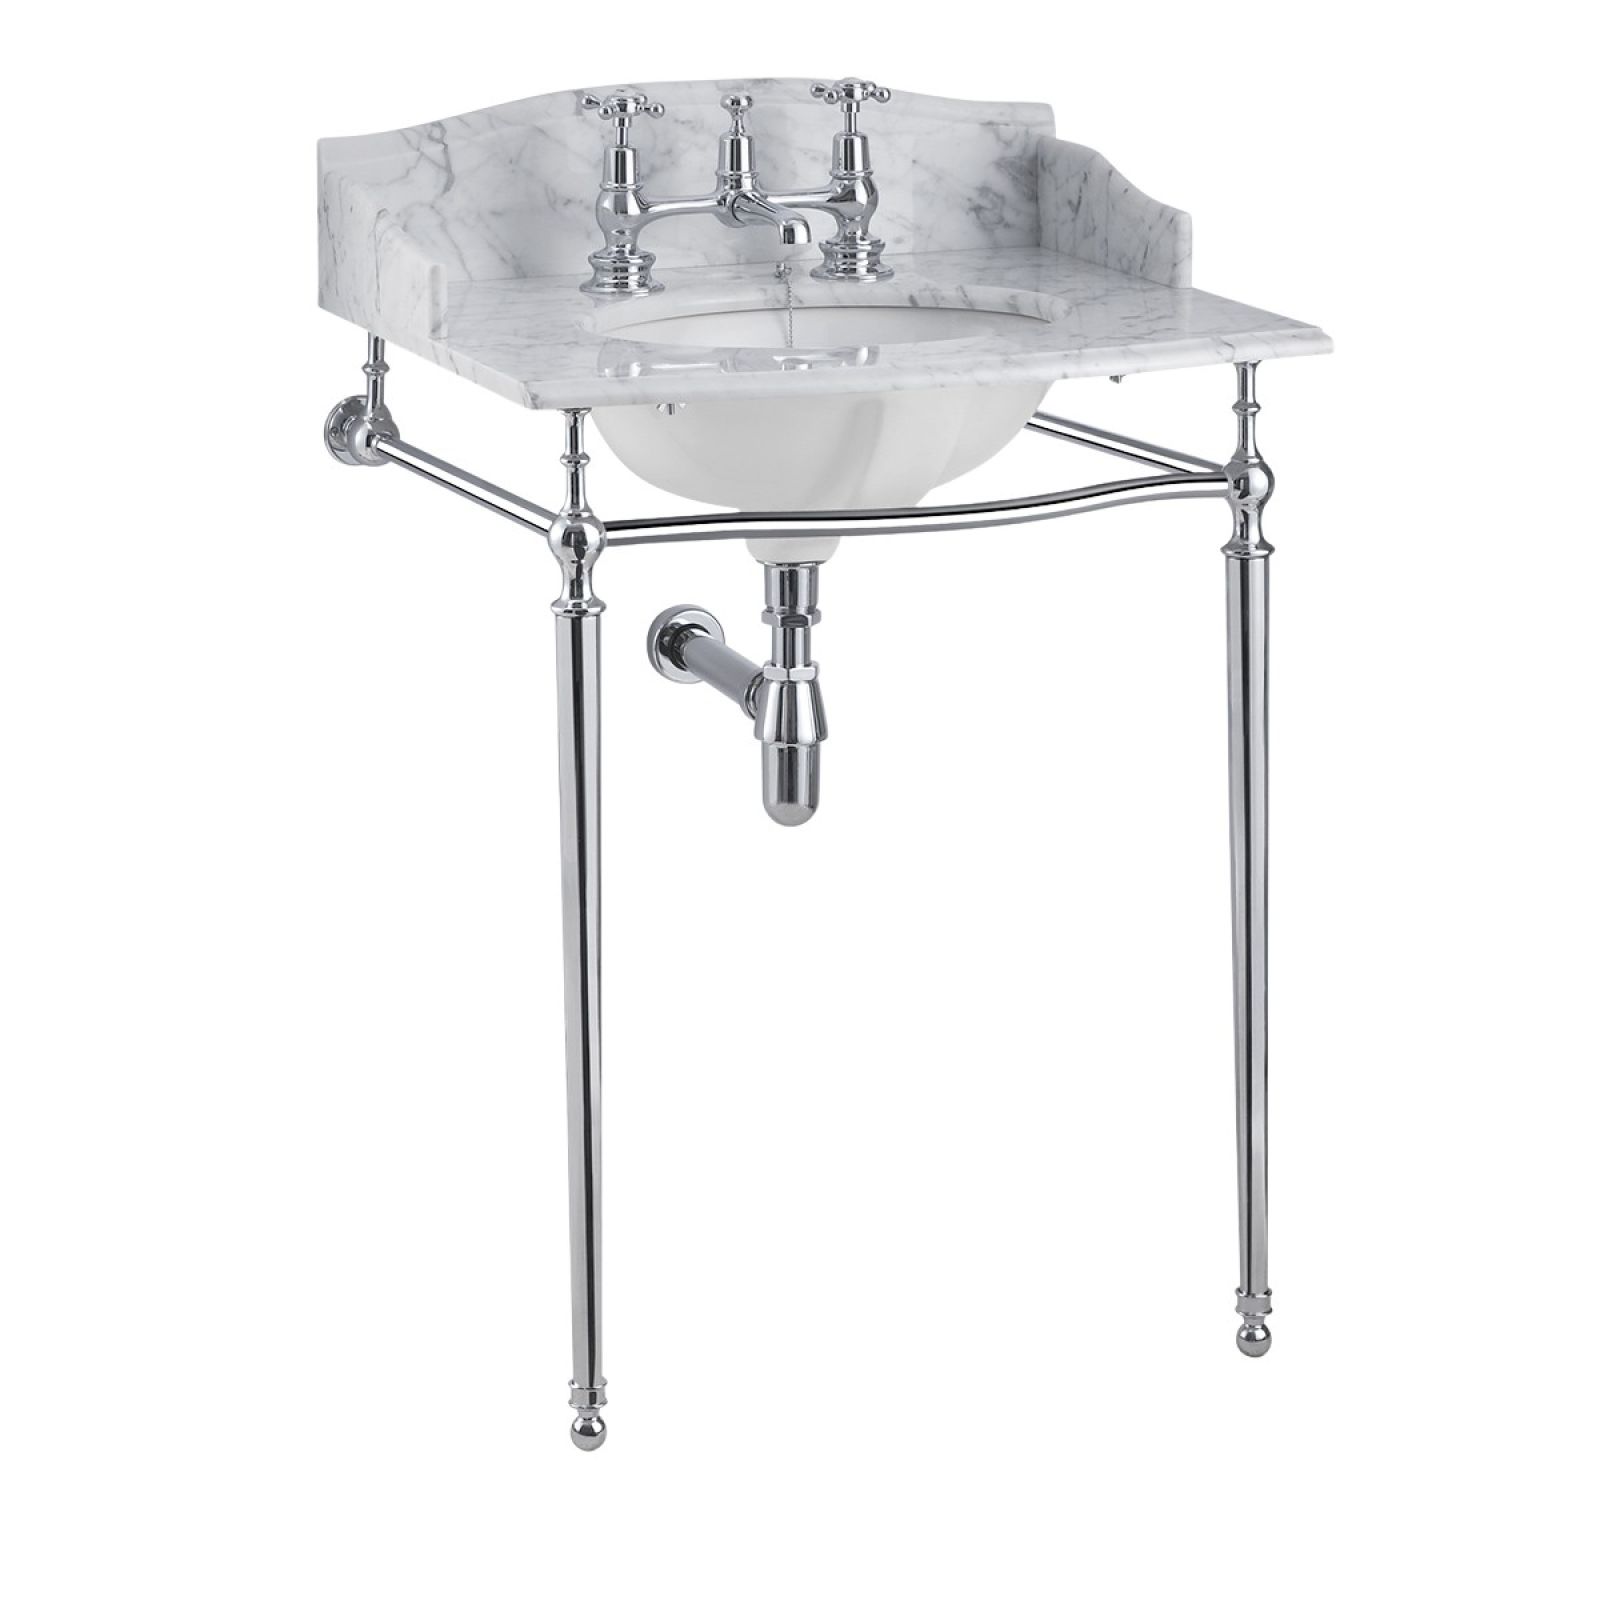 Classic Georgian style marble washstand top with inset basin and simple chrome stand